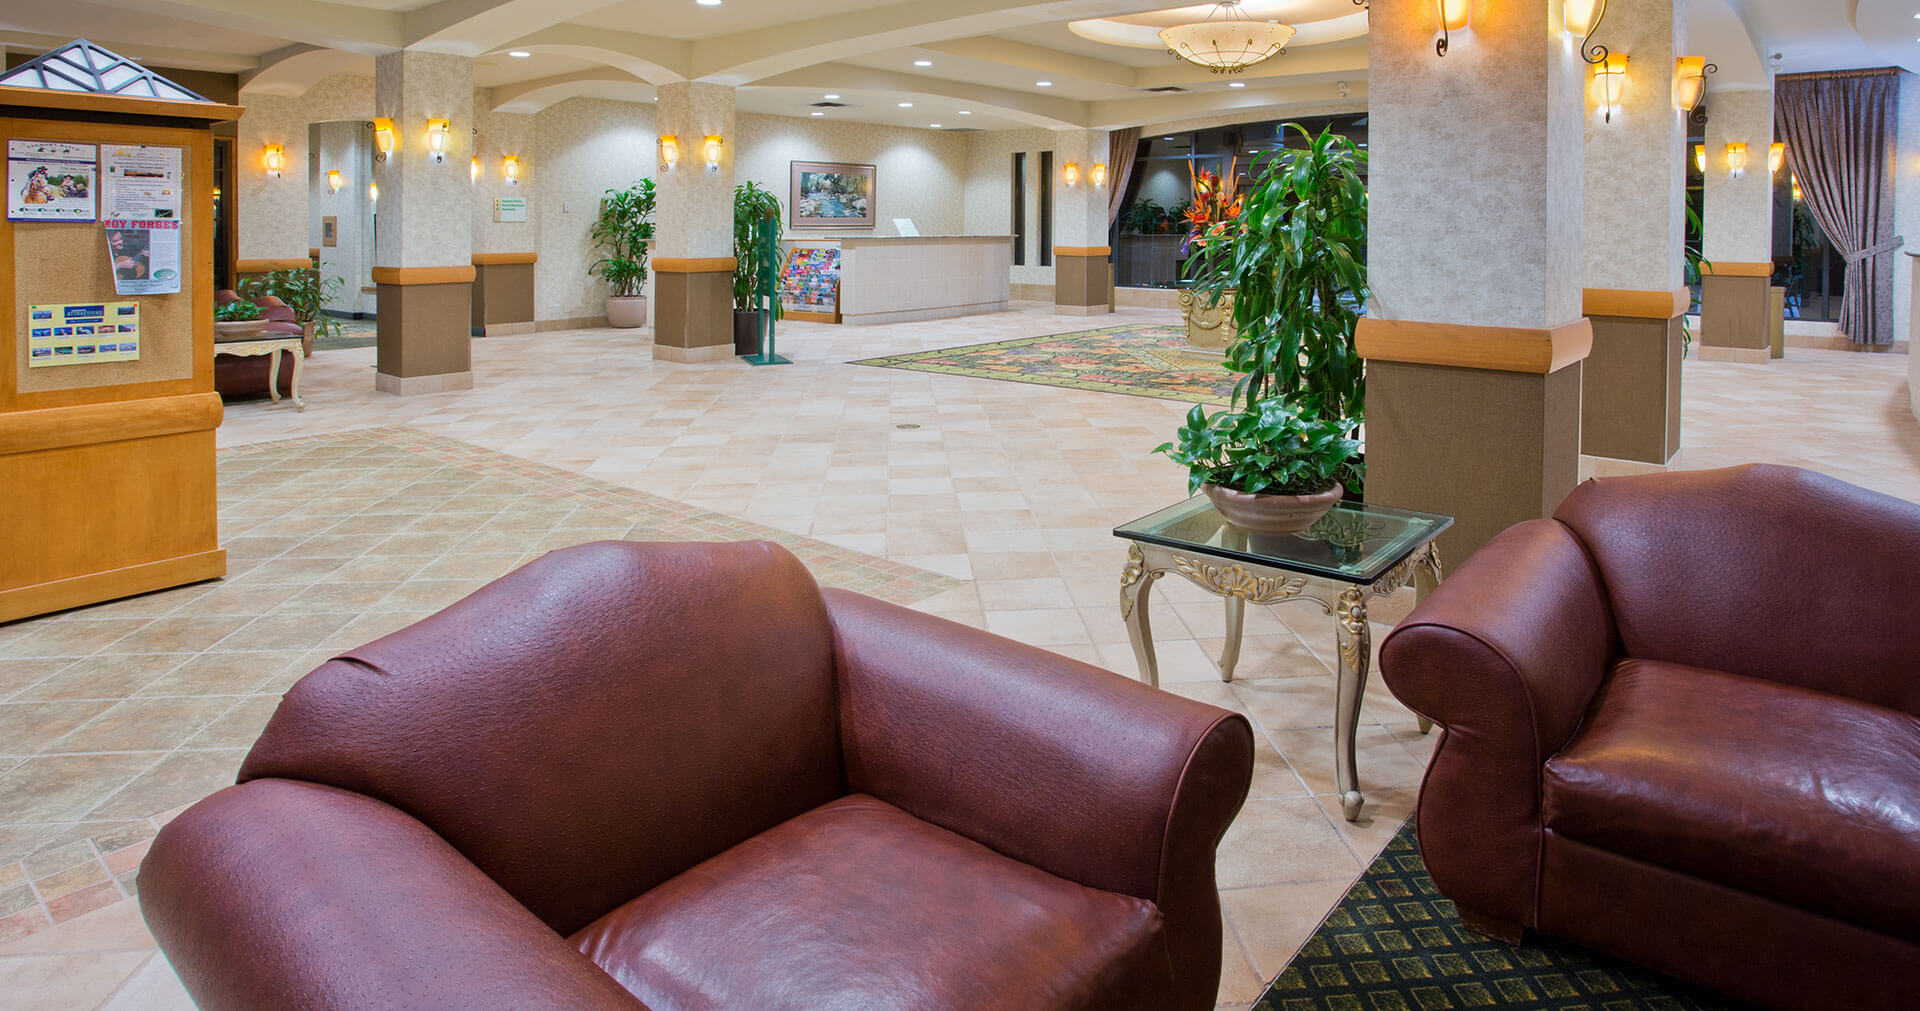 Hotel lobby of the Holiday Inn North Vancouver